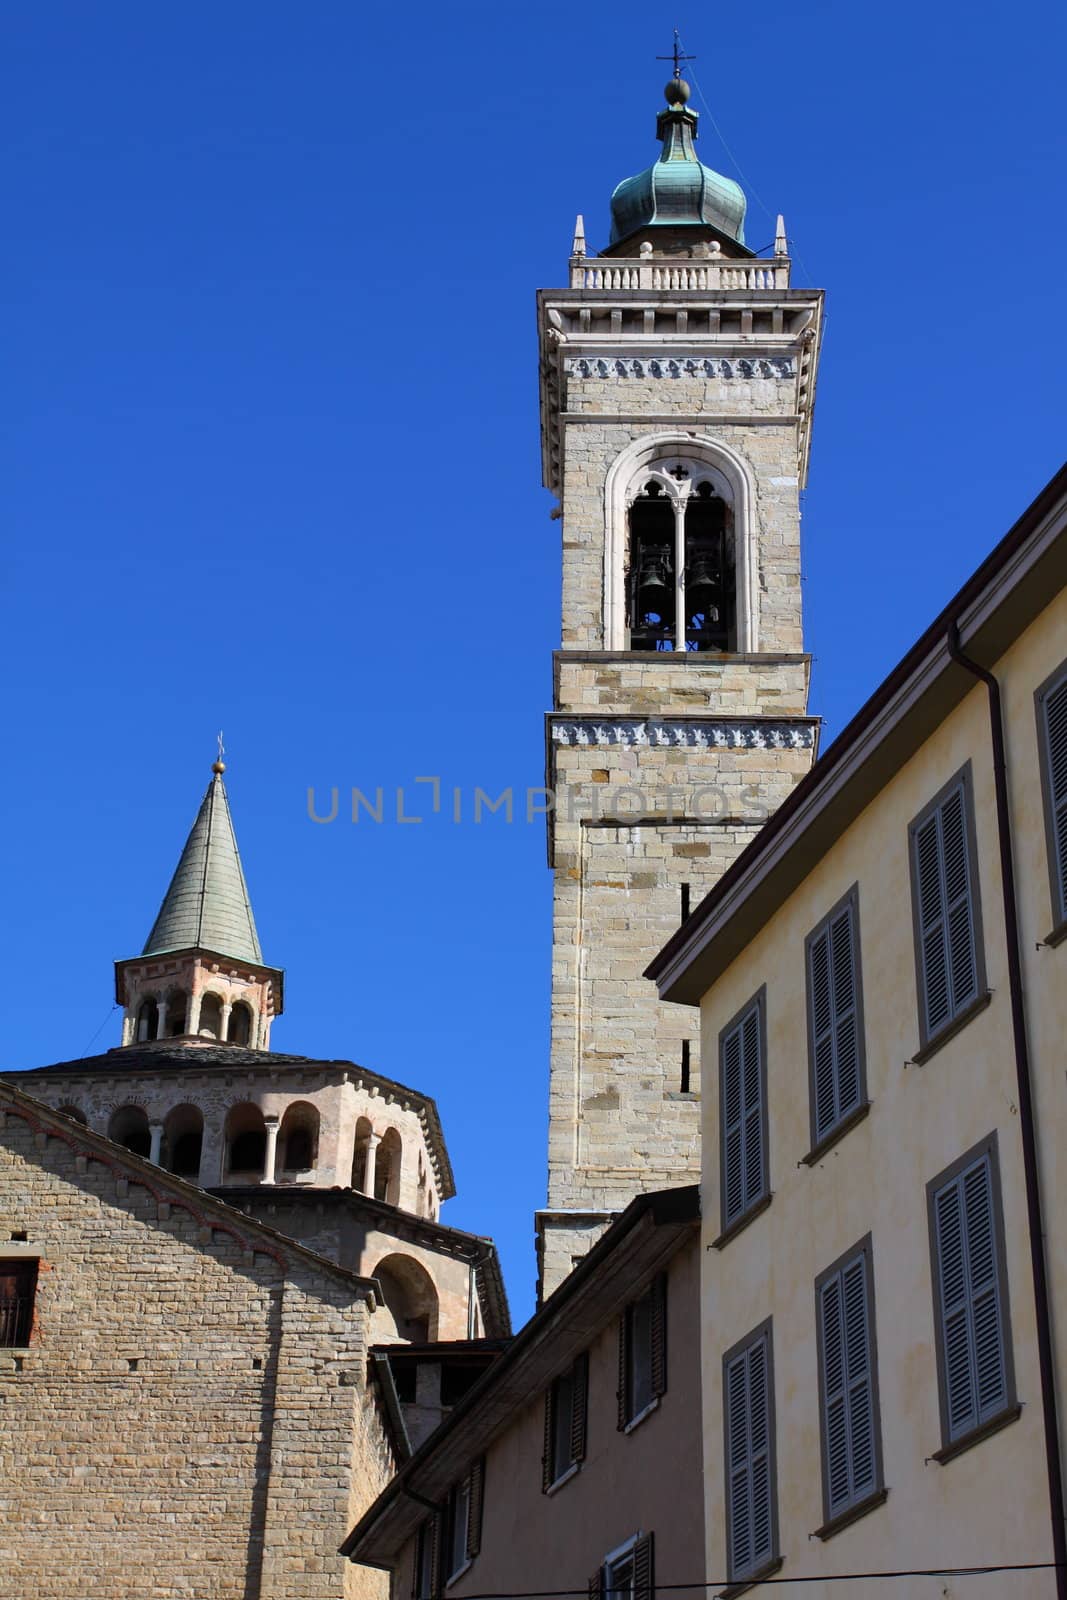 Basilica and tower bell in Bergamo, Lombardy, Italy 